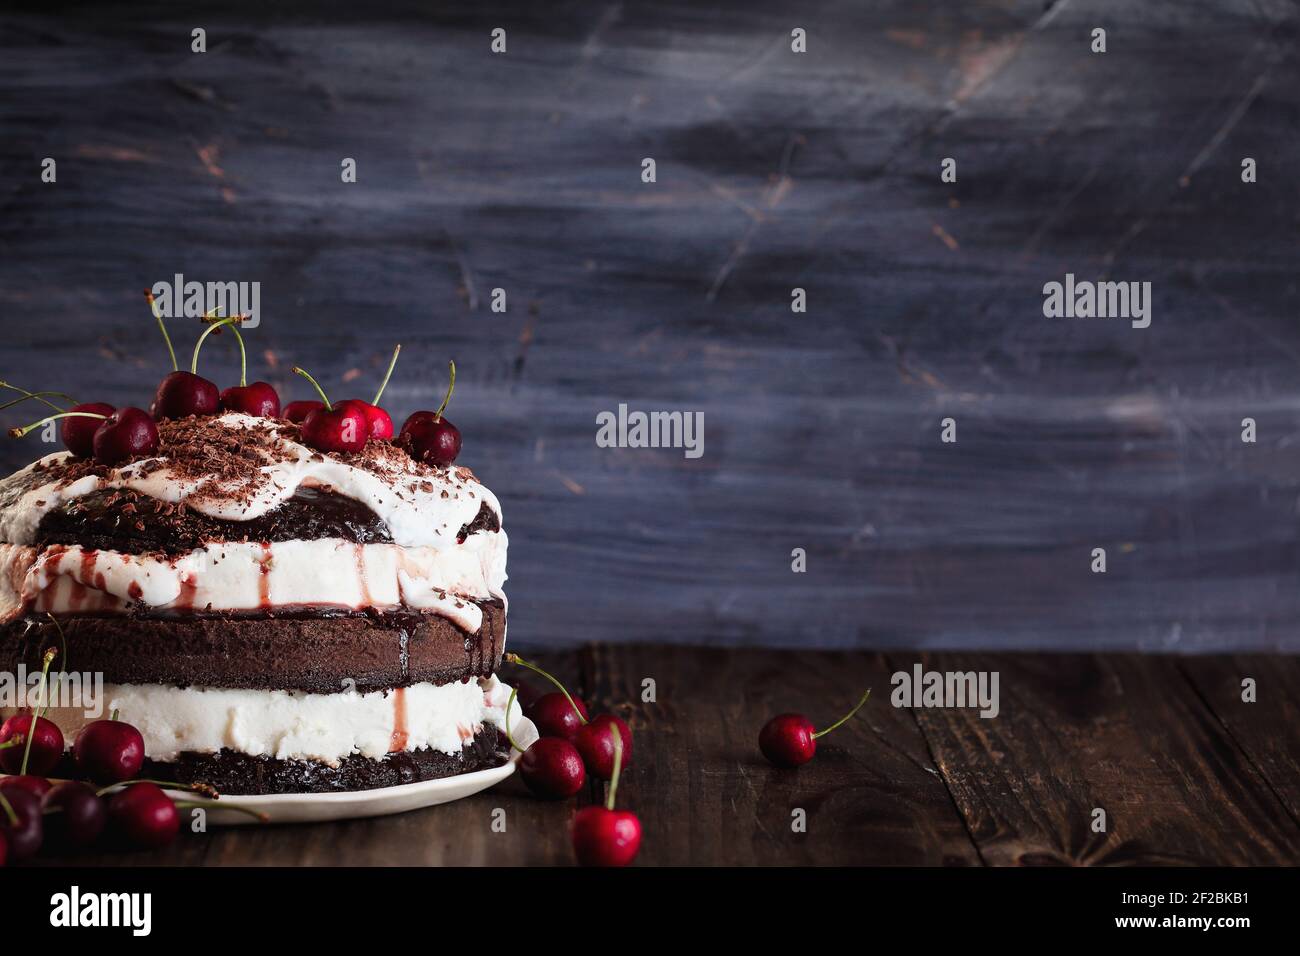 Delicious Black Forest Cherry Cake, Schwarzwald pie dessert, over a dark rustic wood table. Selective focus with blurred background and free space for Stock Photo